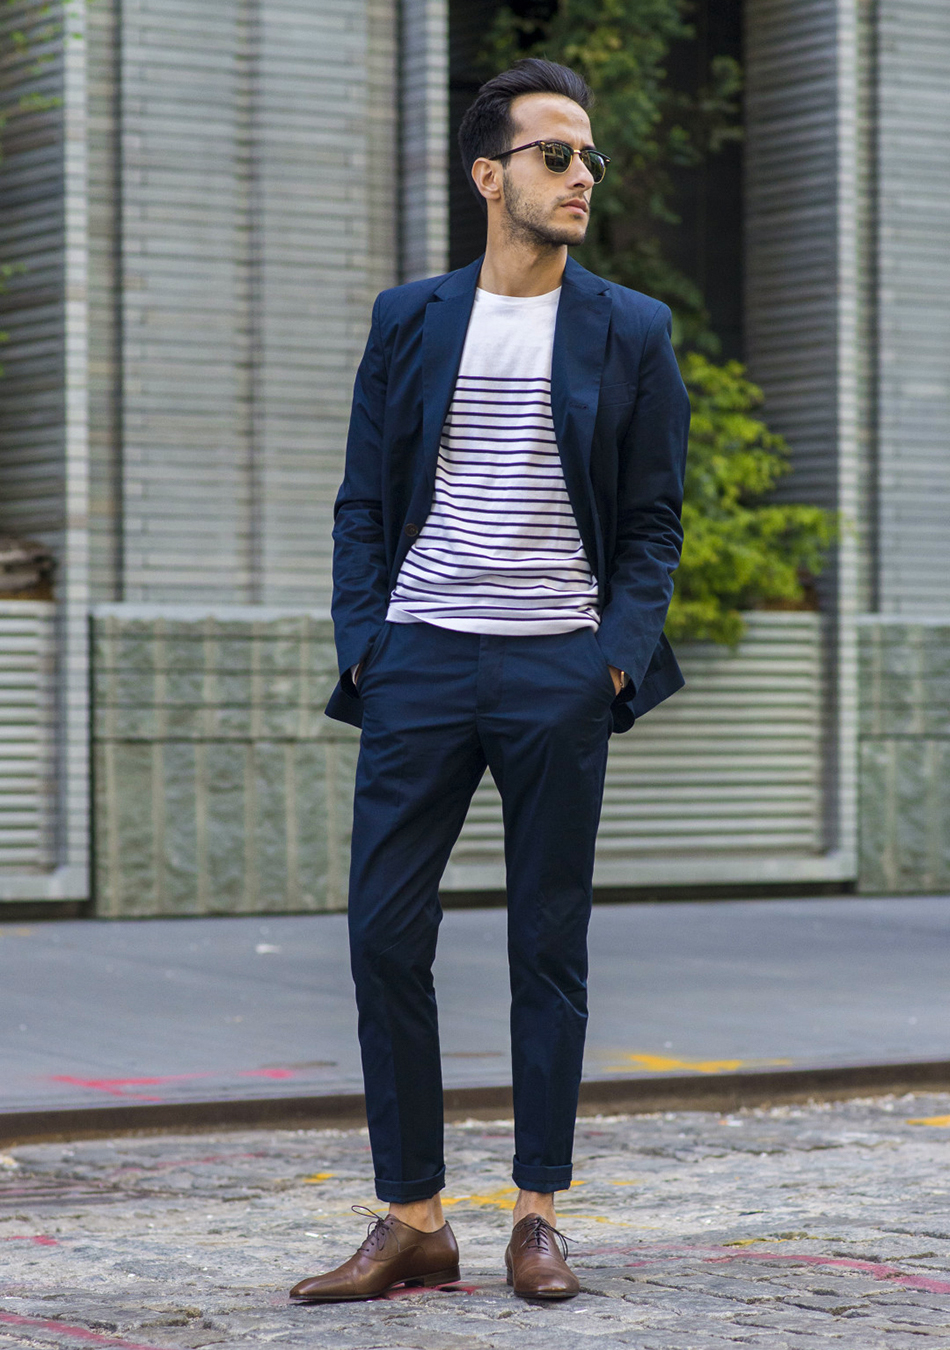 Navy blue suit, white t-shirt, and brown oxford shoes